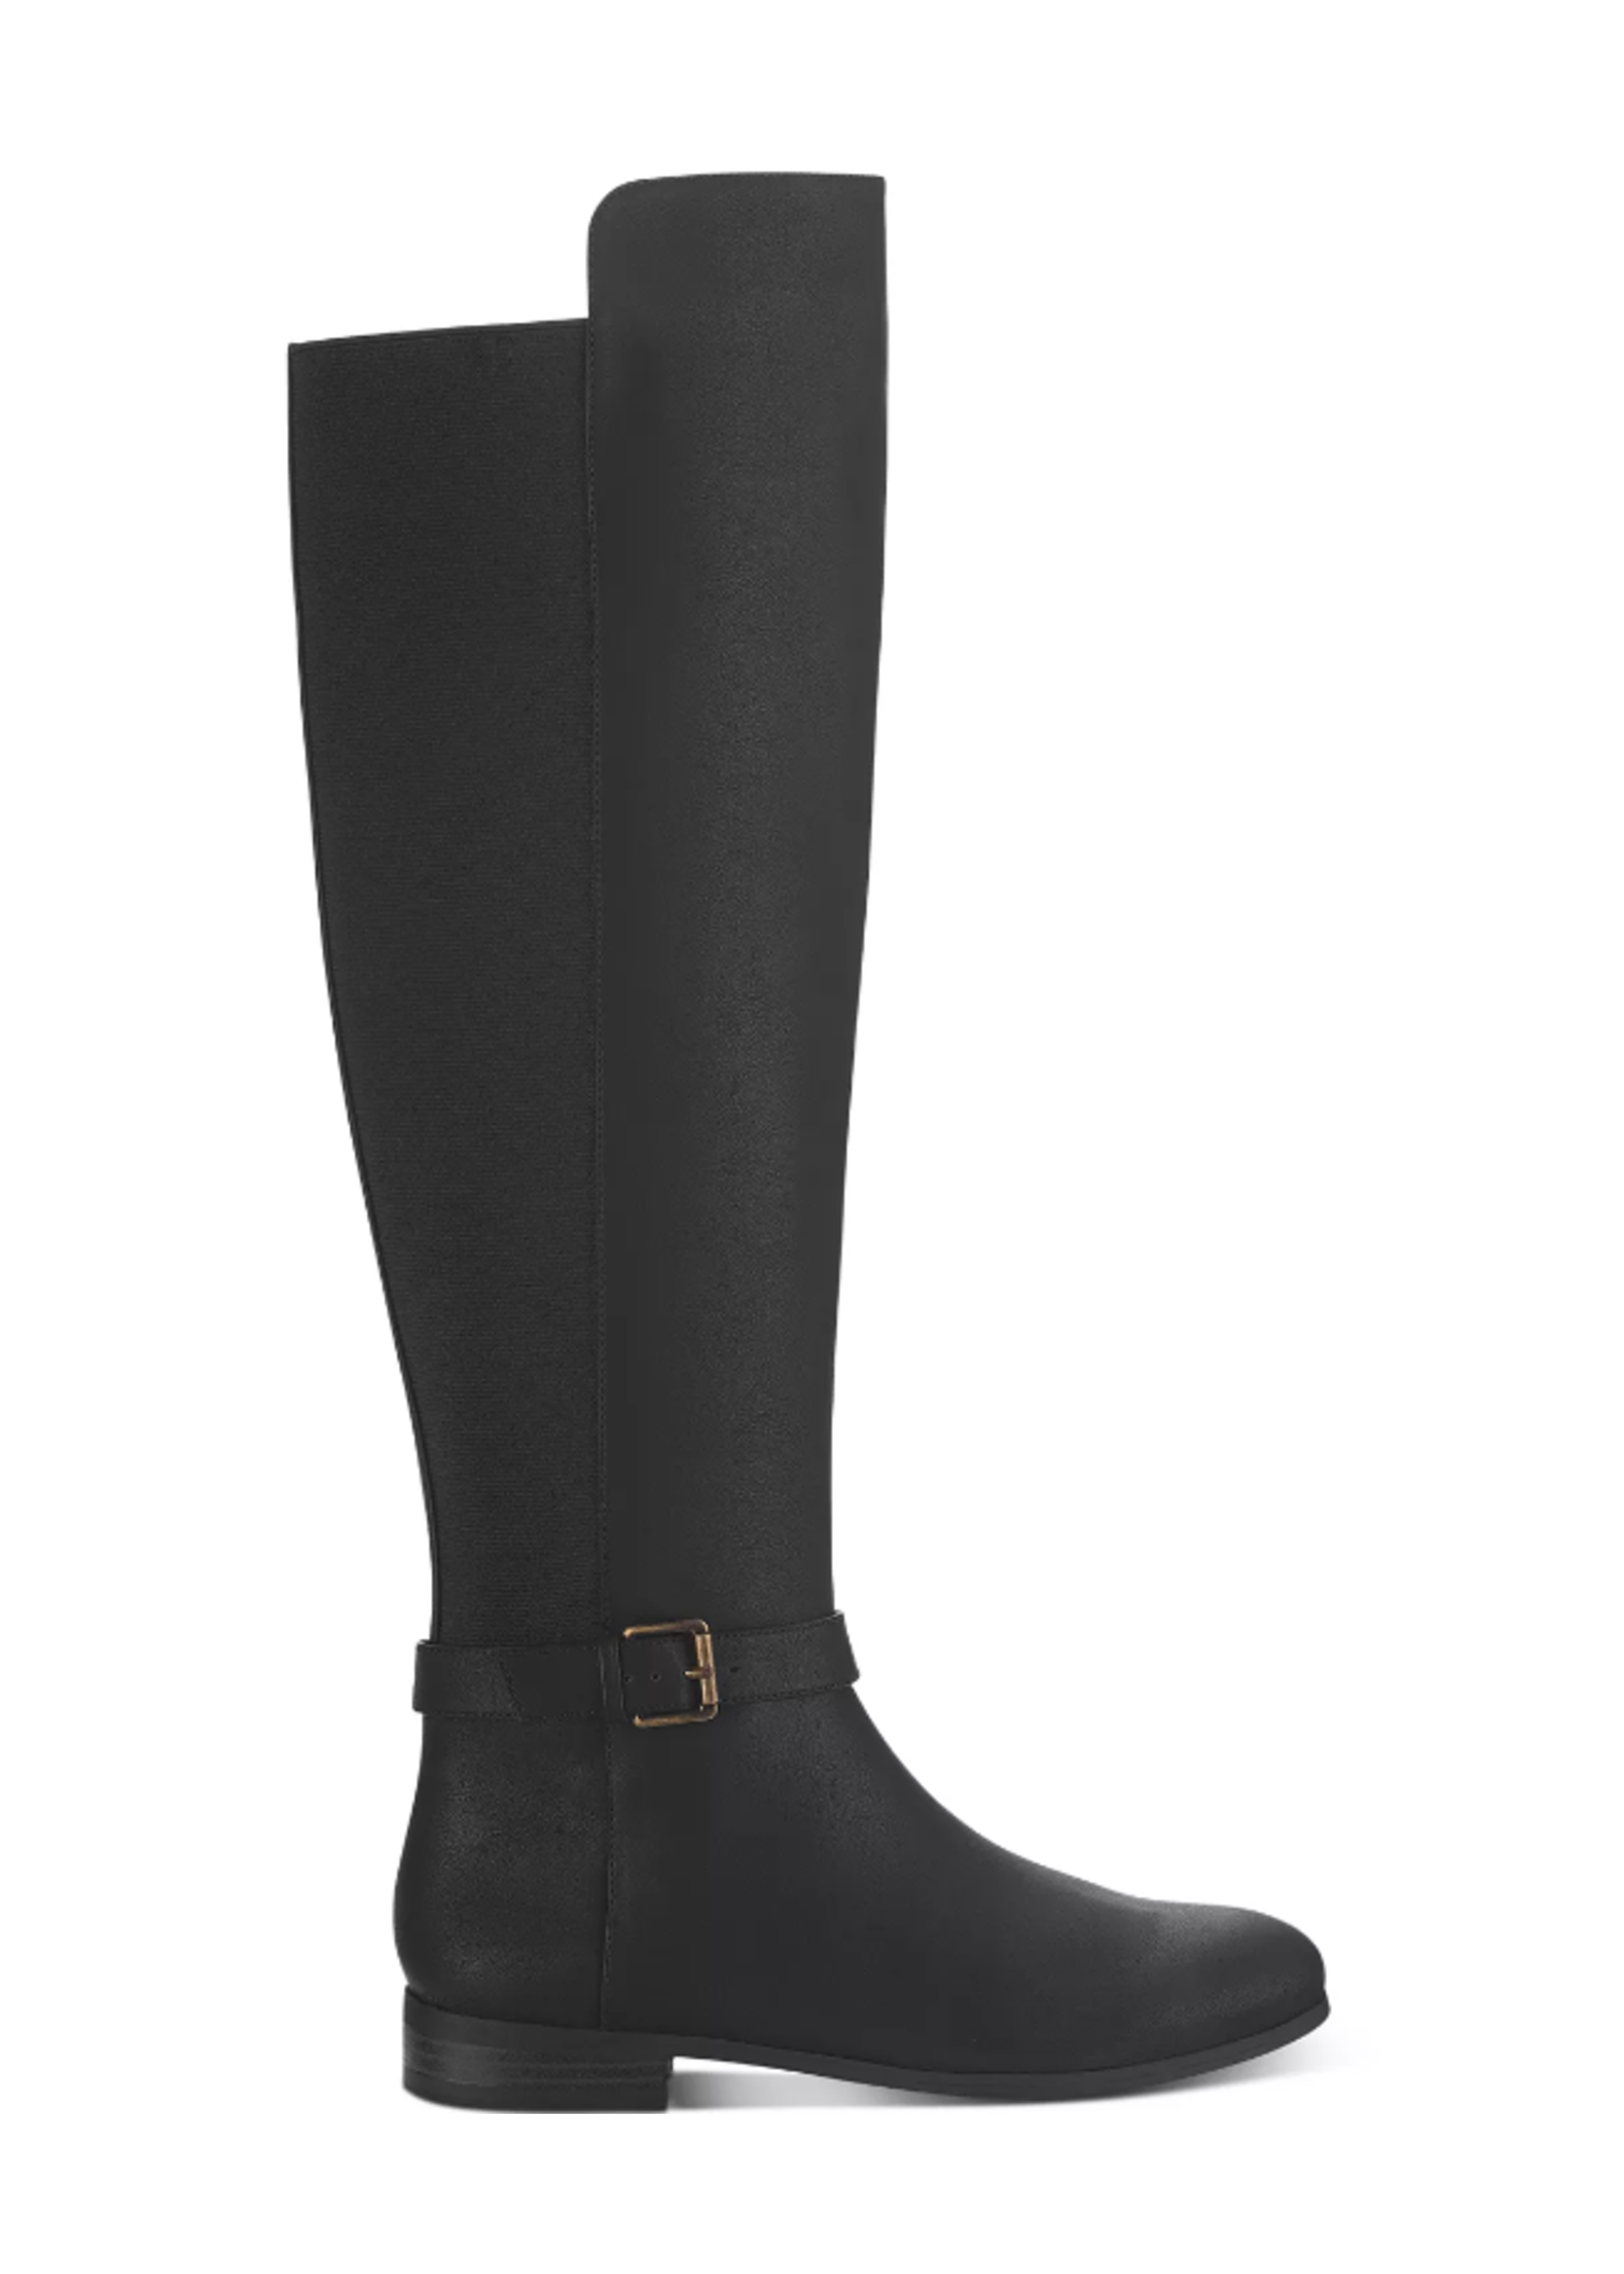 style&co Style & Co Women's Black Over-The-Knee Boots, 7.5M